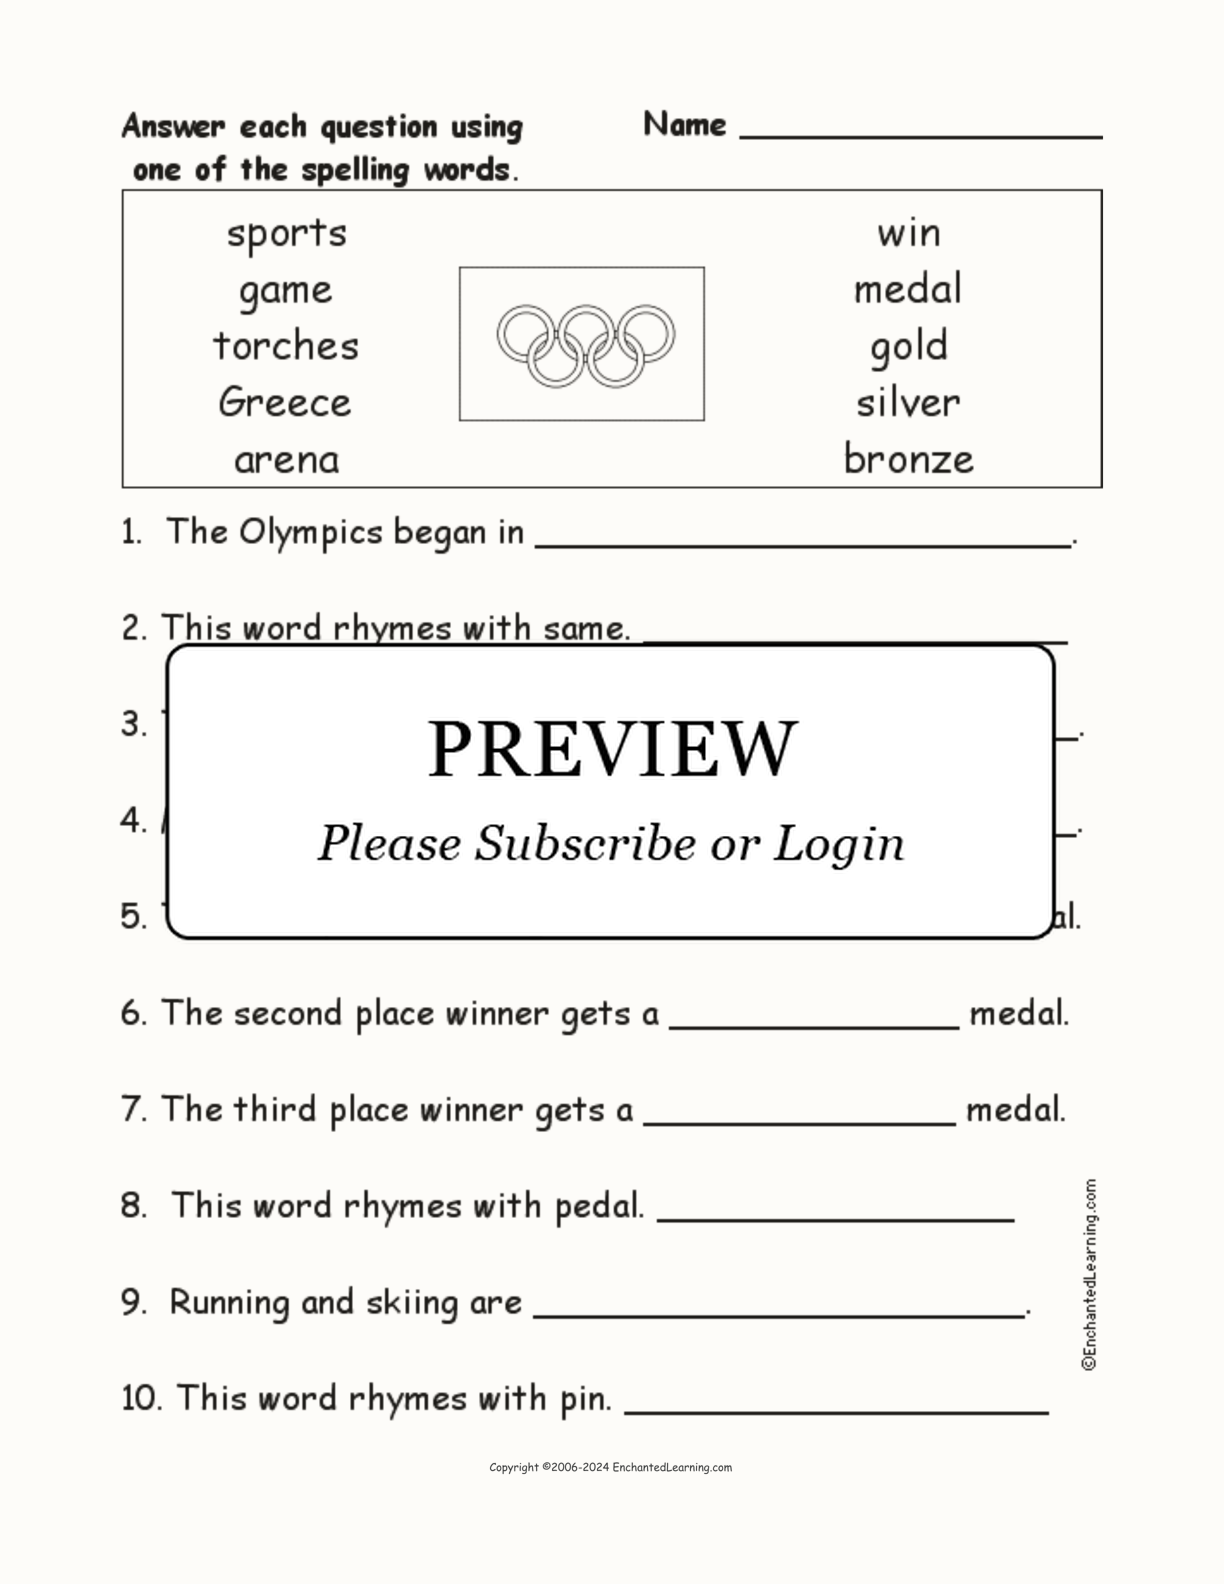 Olympics Spelling Word Questions interactive worksheet page 1